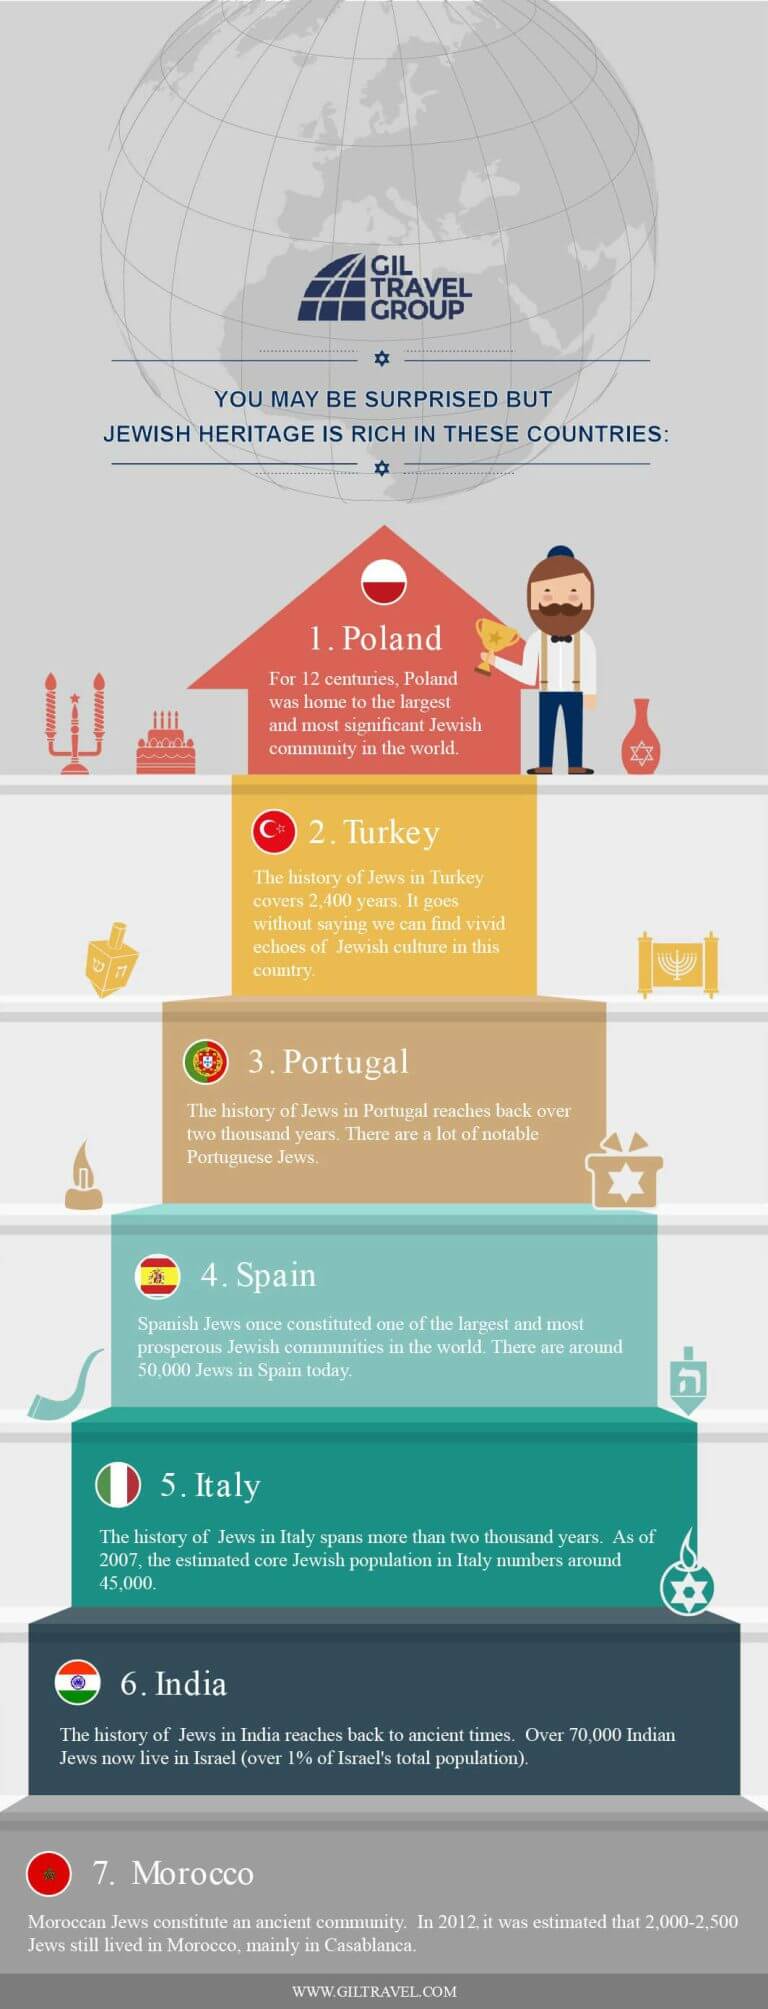 Top7-Jewish-heritage-places-out-of-Israel-infographic-2